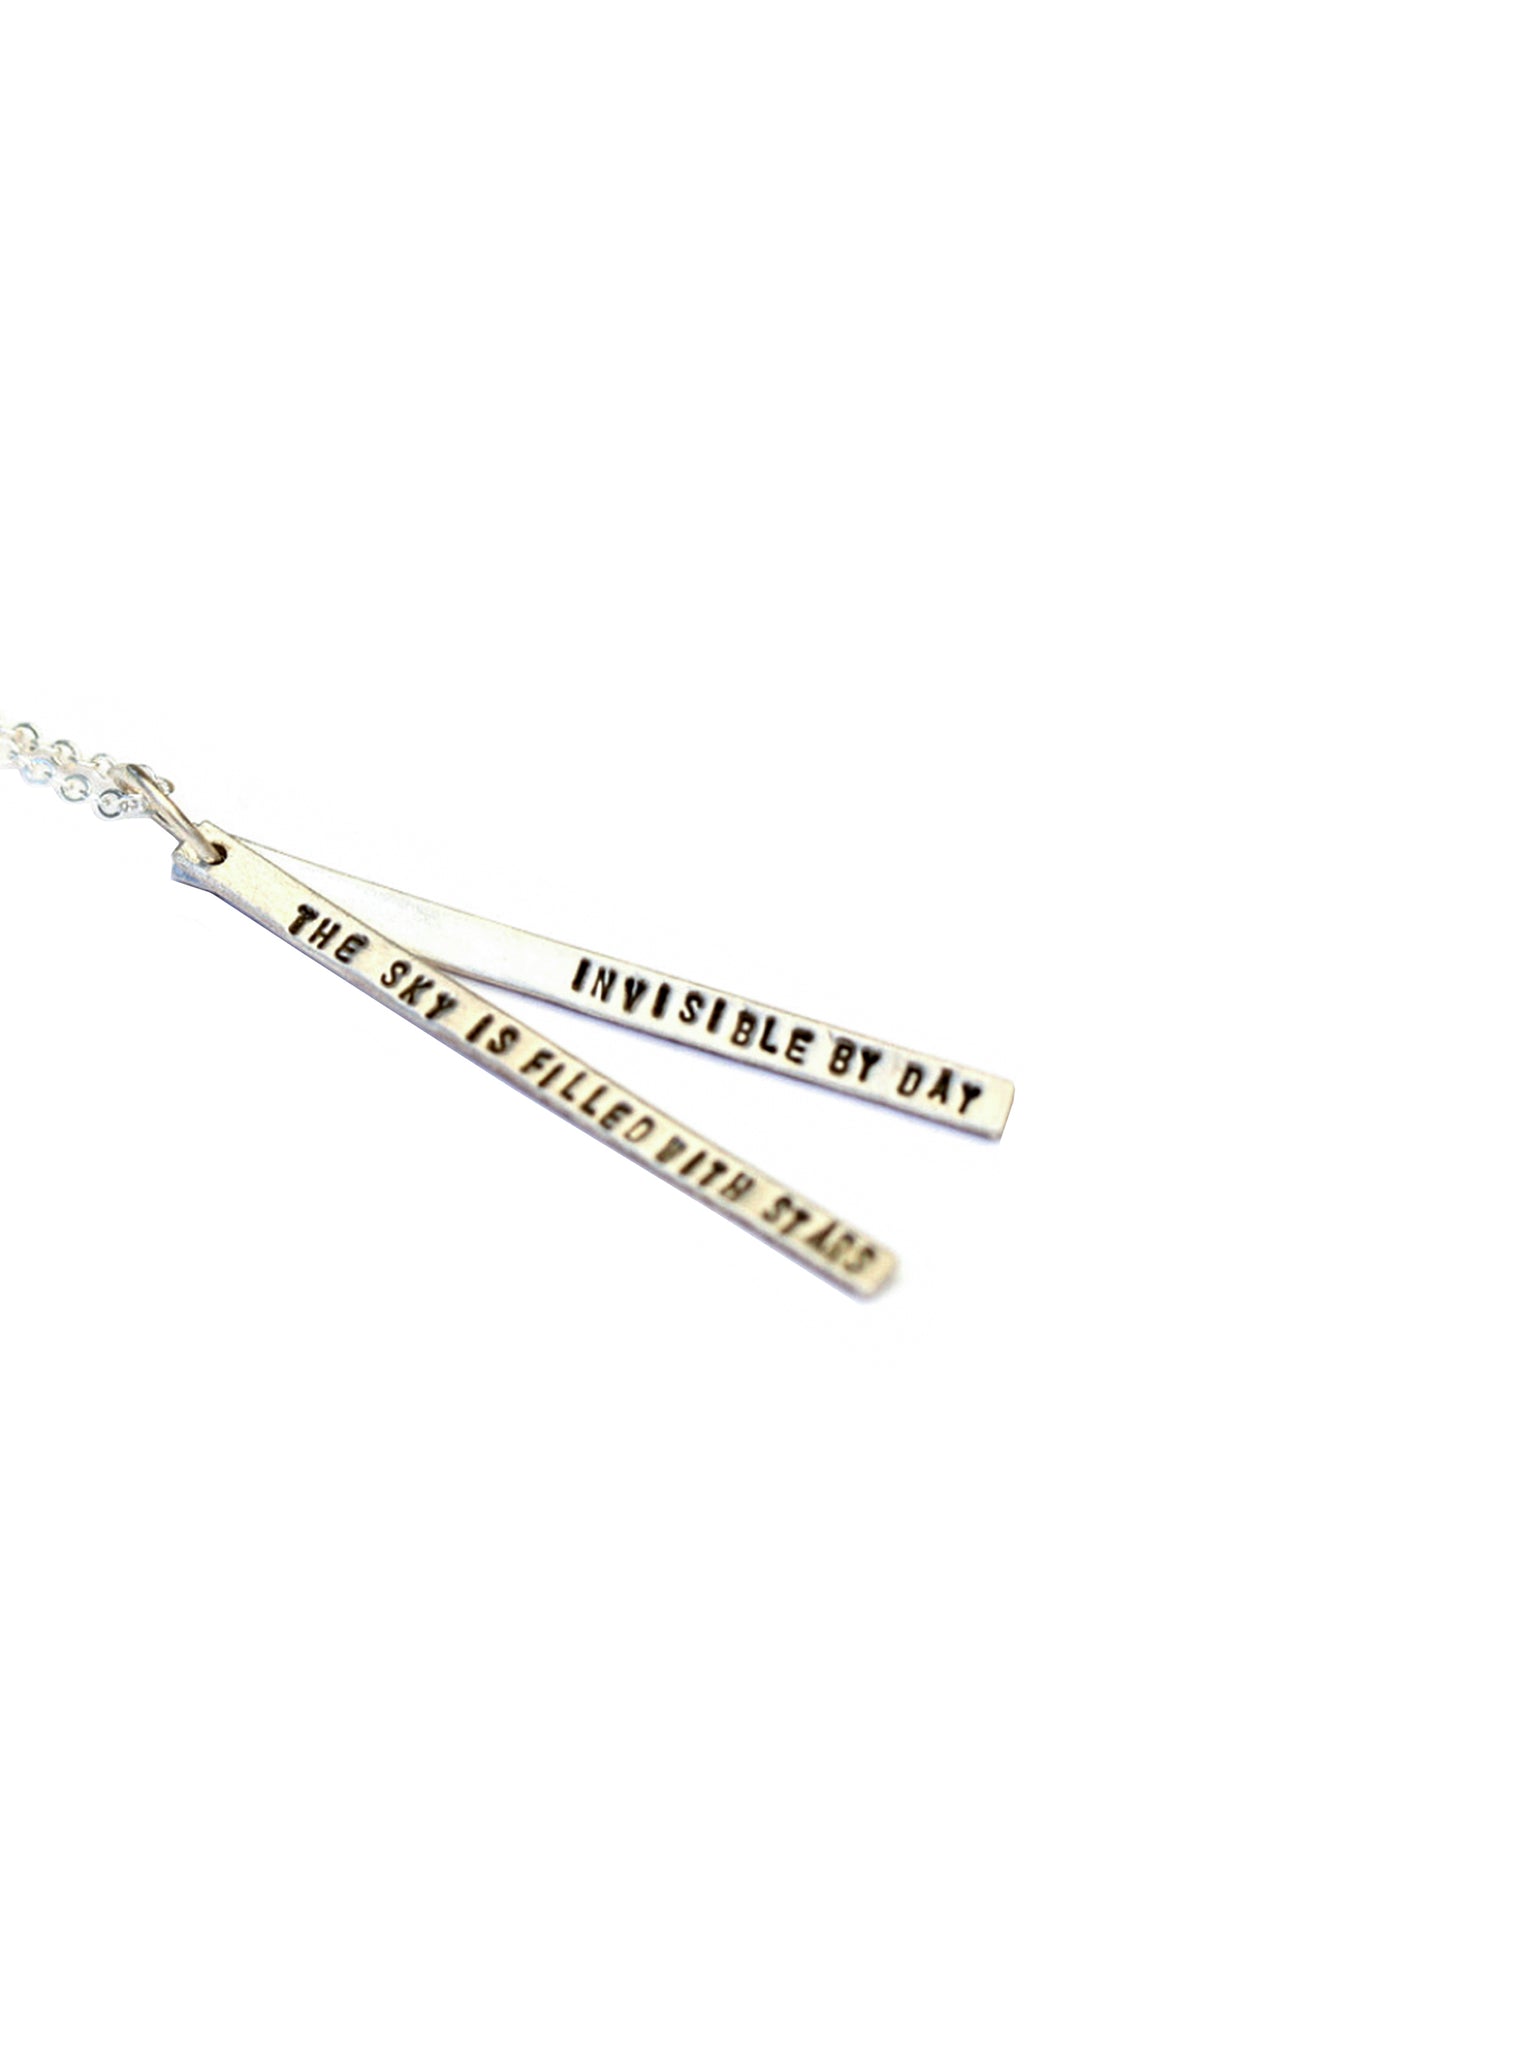 Chocolate & Steel Long-Bar Quote Necklace Henry Wadsworth Longfellow